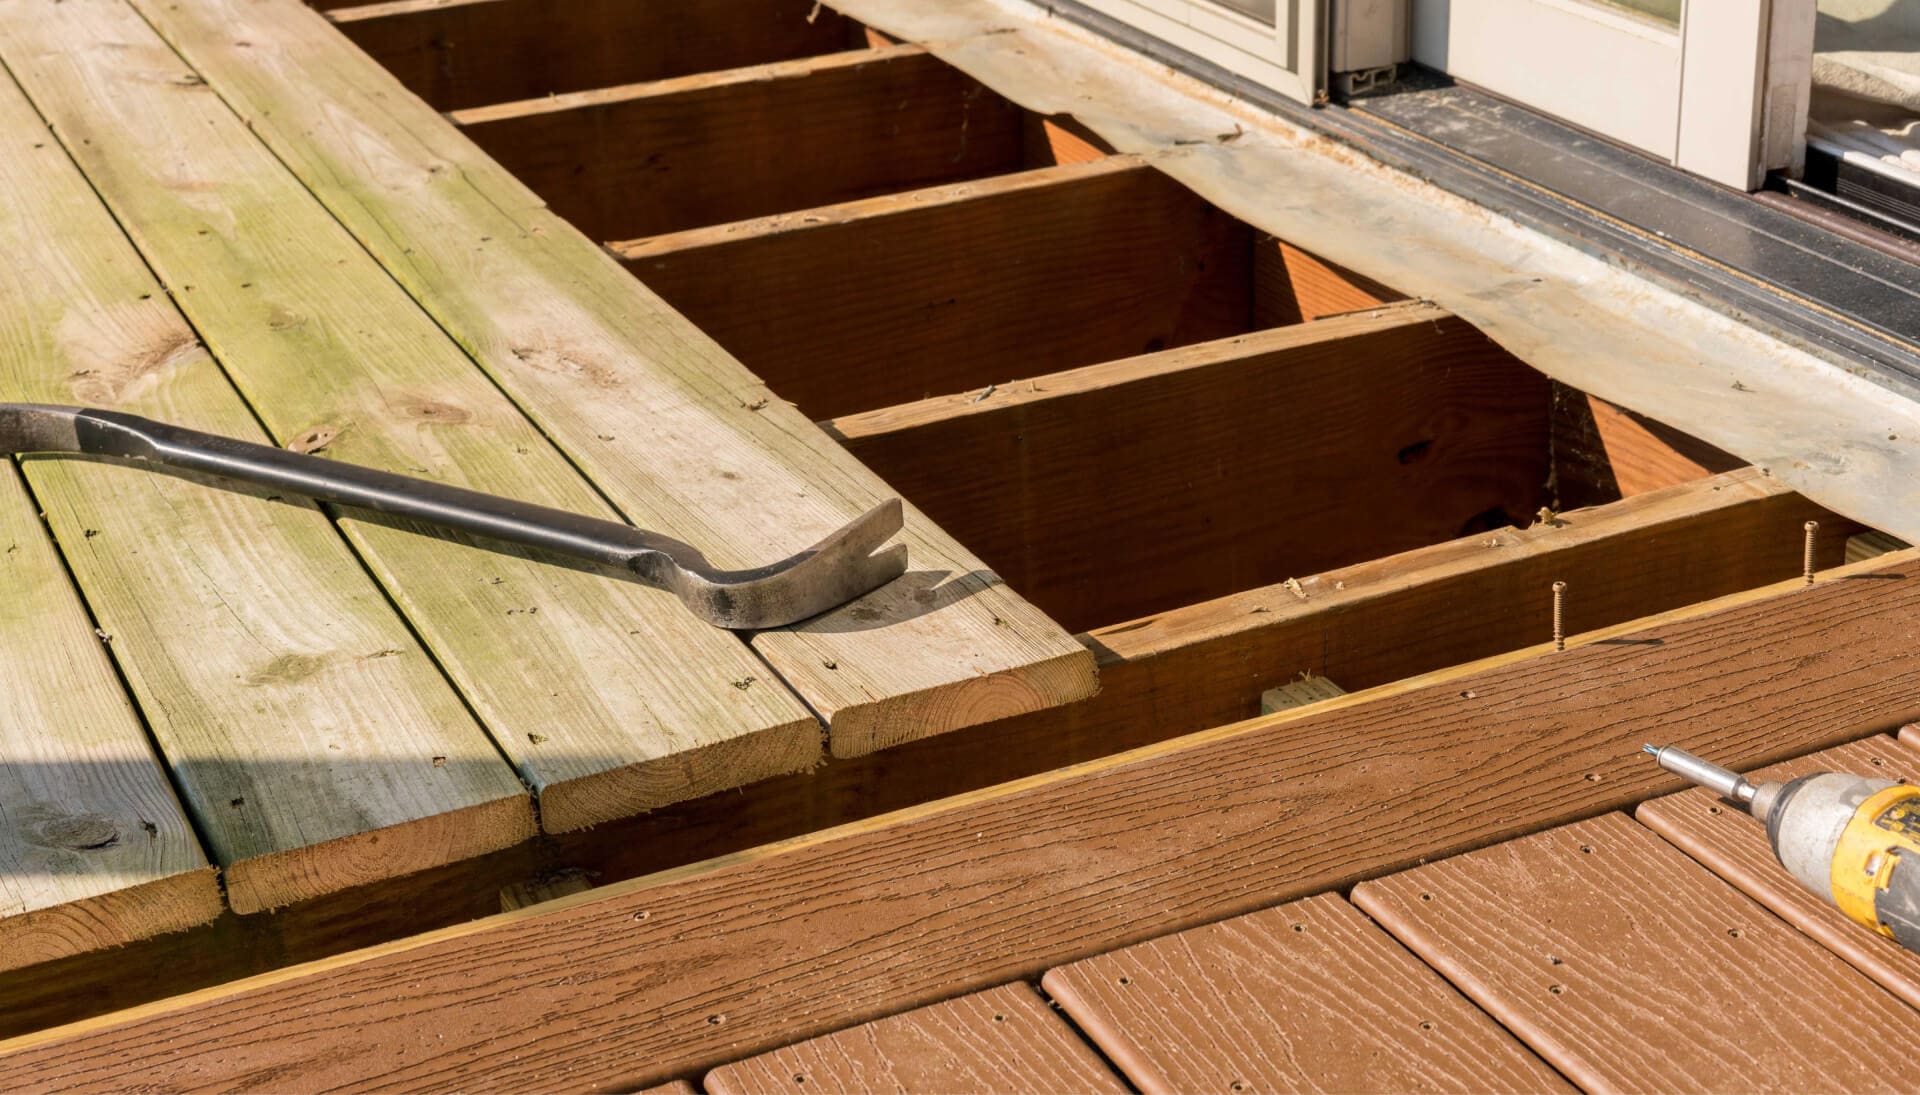 A professional deck repair service in Sarasota, providing thorough inspections and maintenance to ensure the safety and durability of the structure